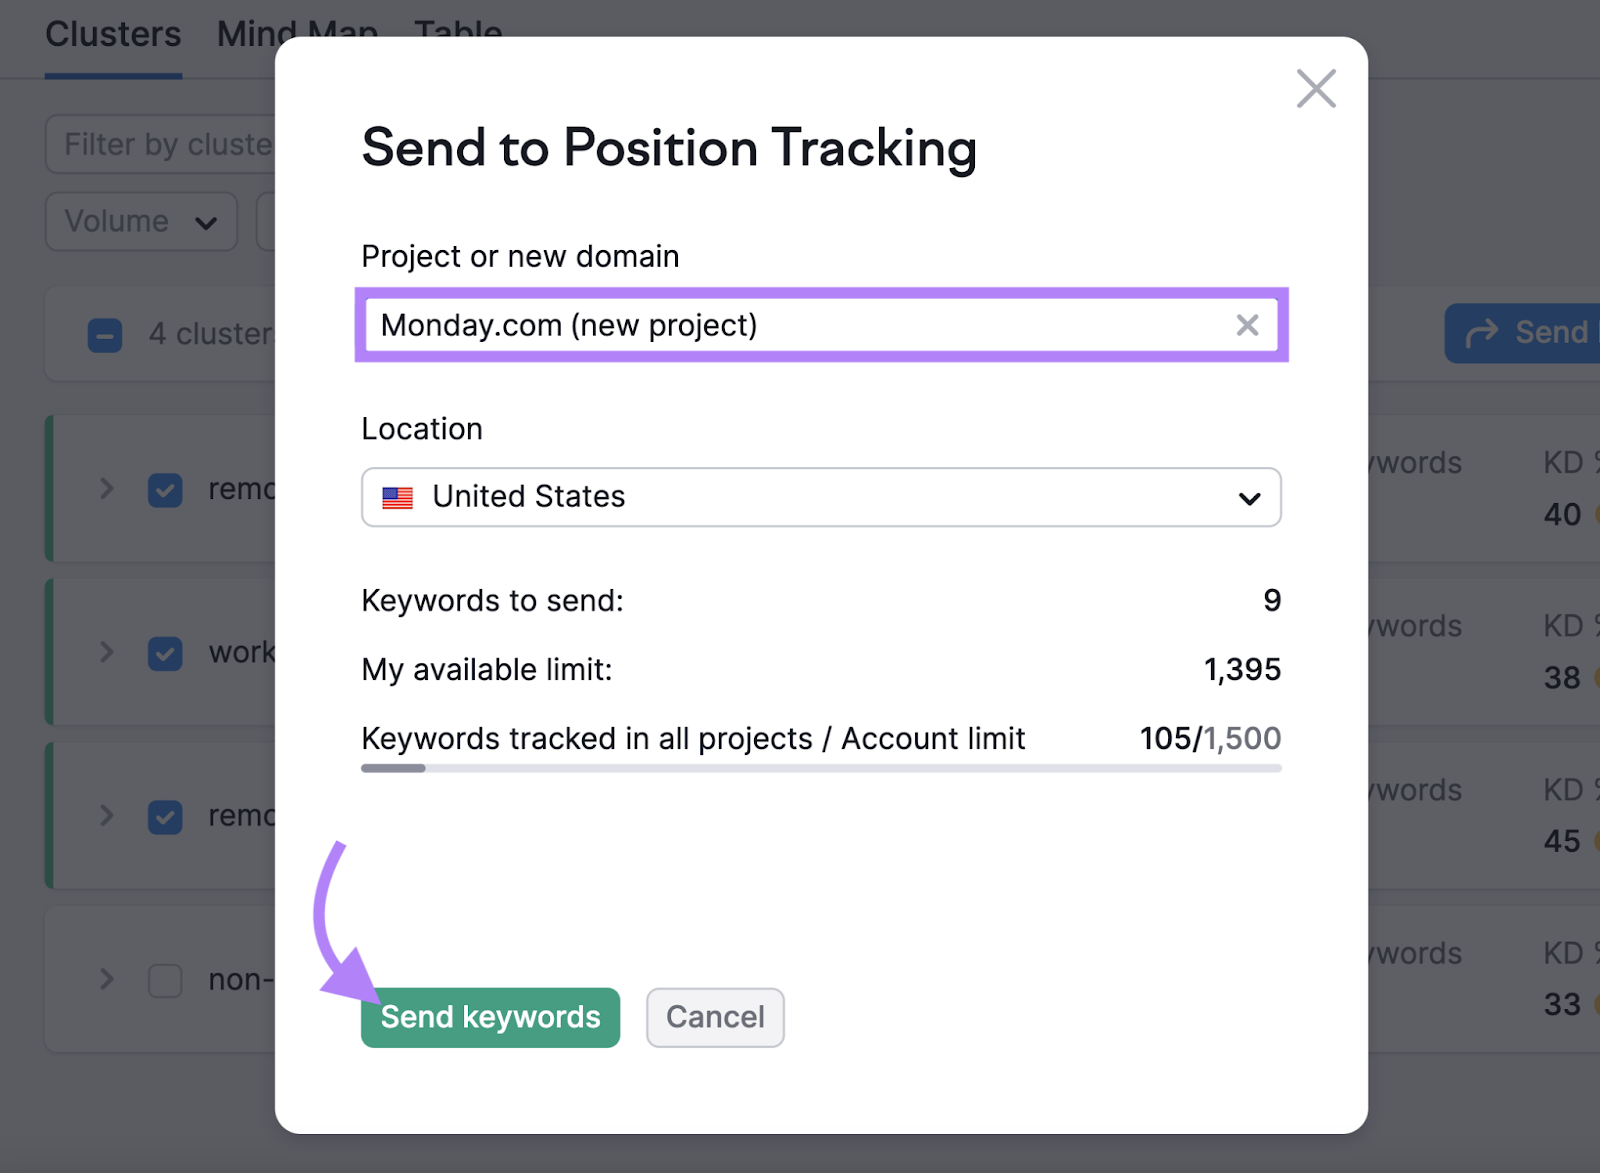 "Send to Position Tracking" pop-up window